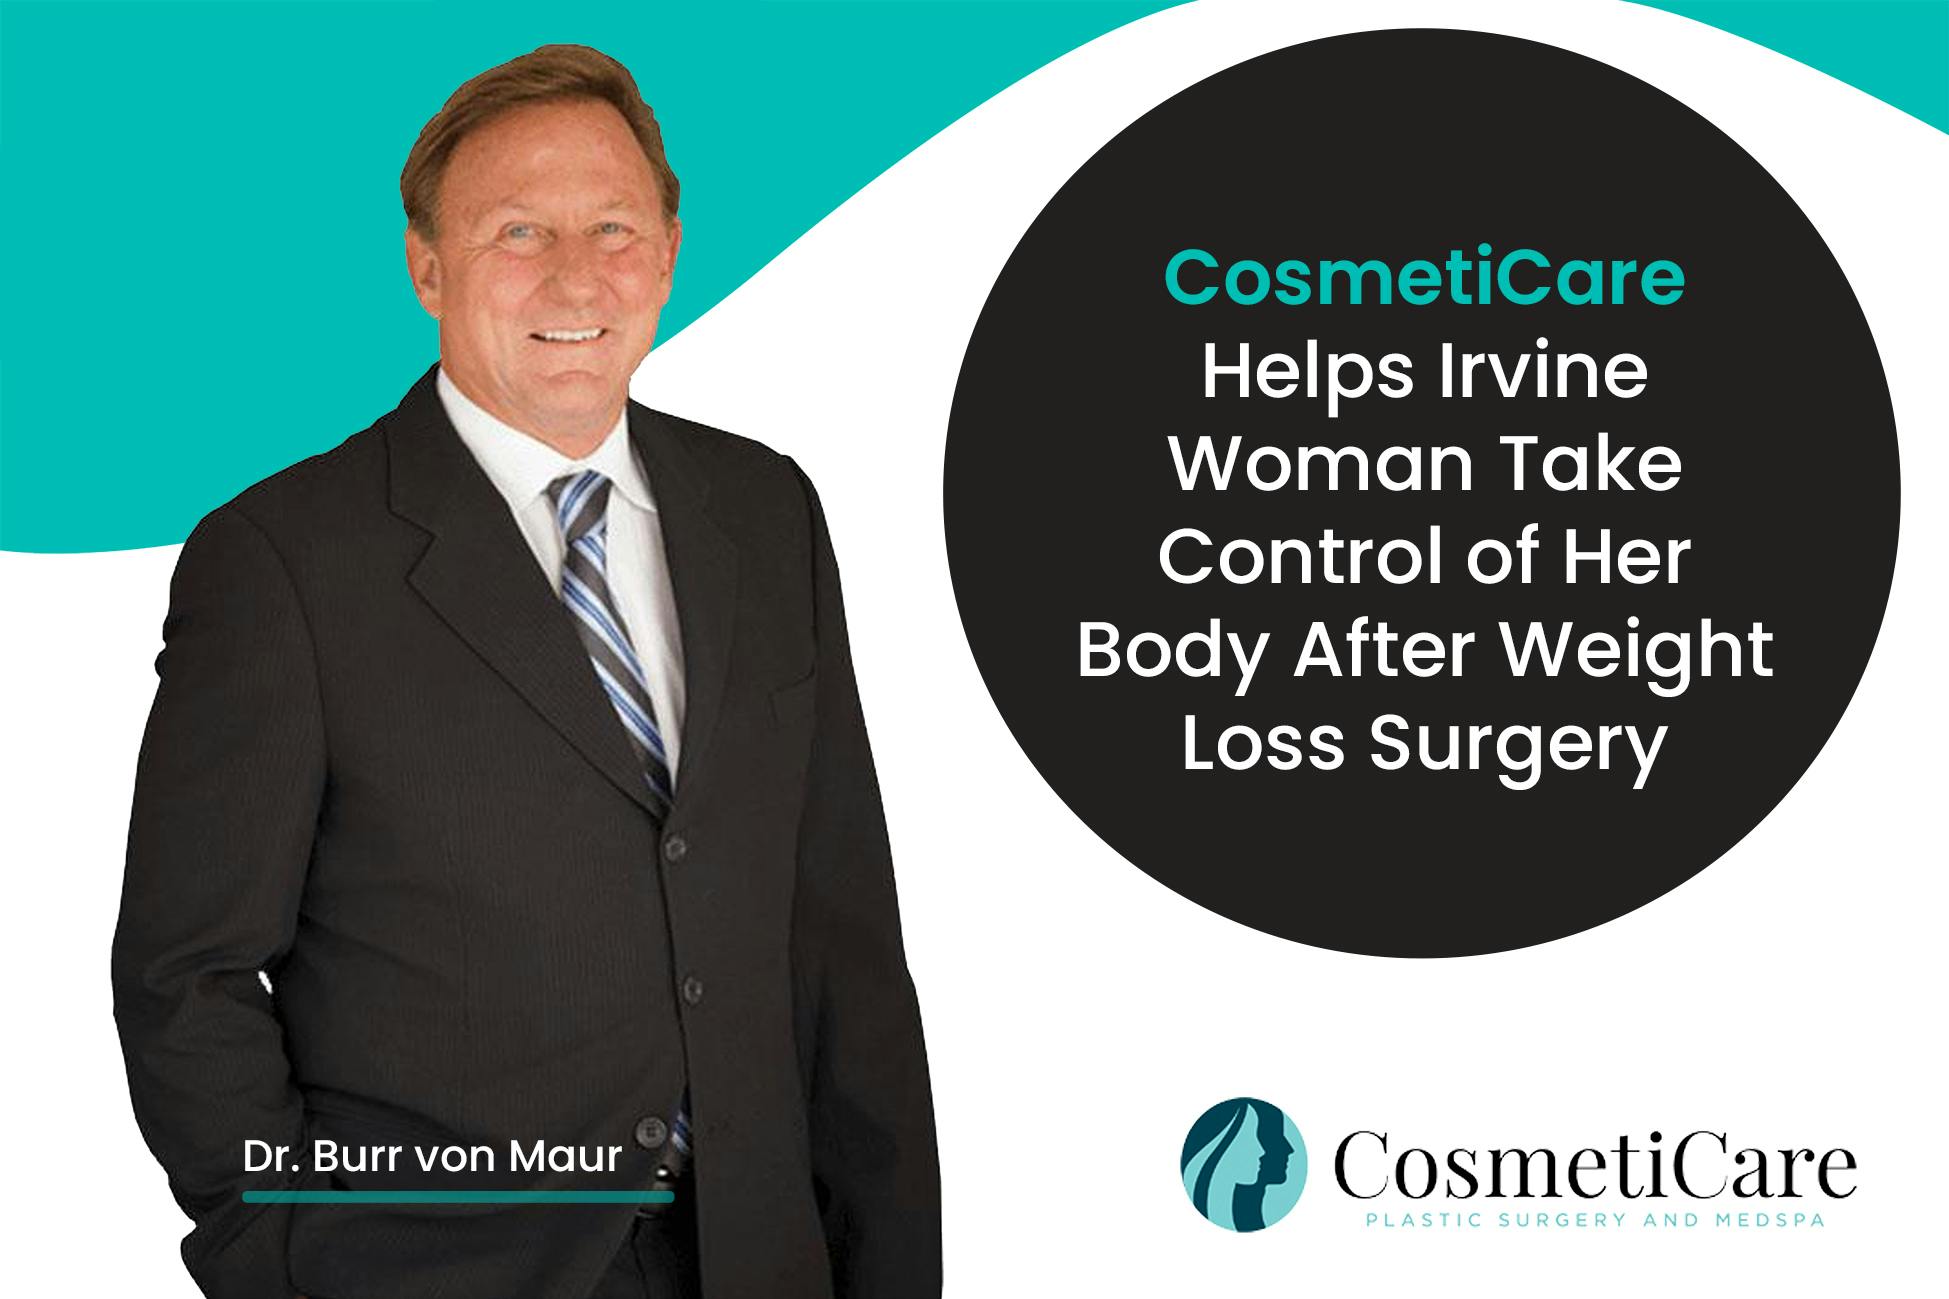 CosmetiCare Helps Irvine Woman Take Control of Her Body After Weight Loss Surgery